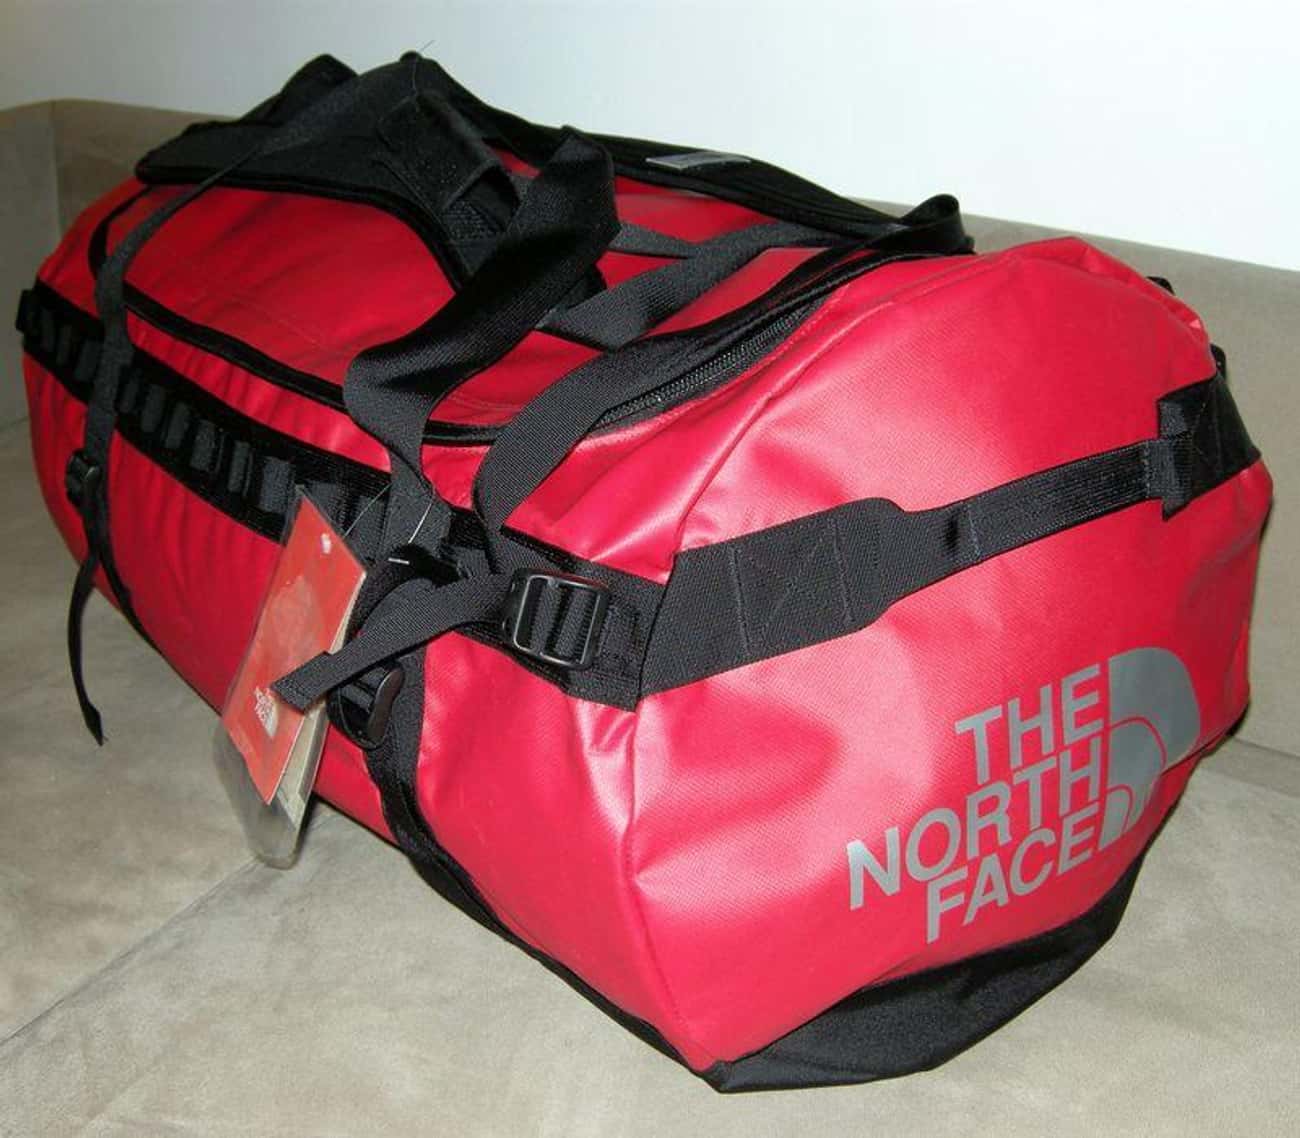 Williams Was Found Padlocked In A North Face Bag